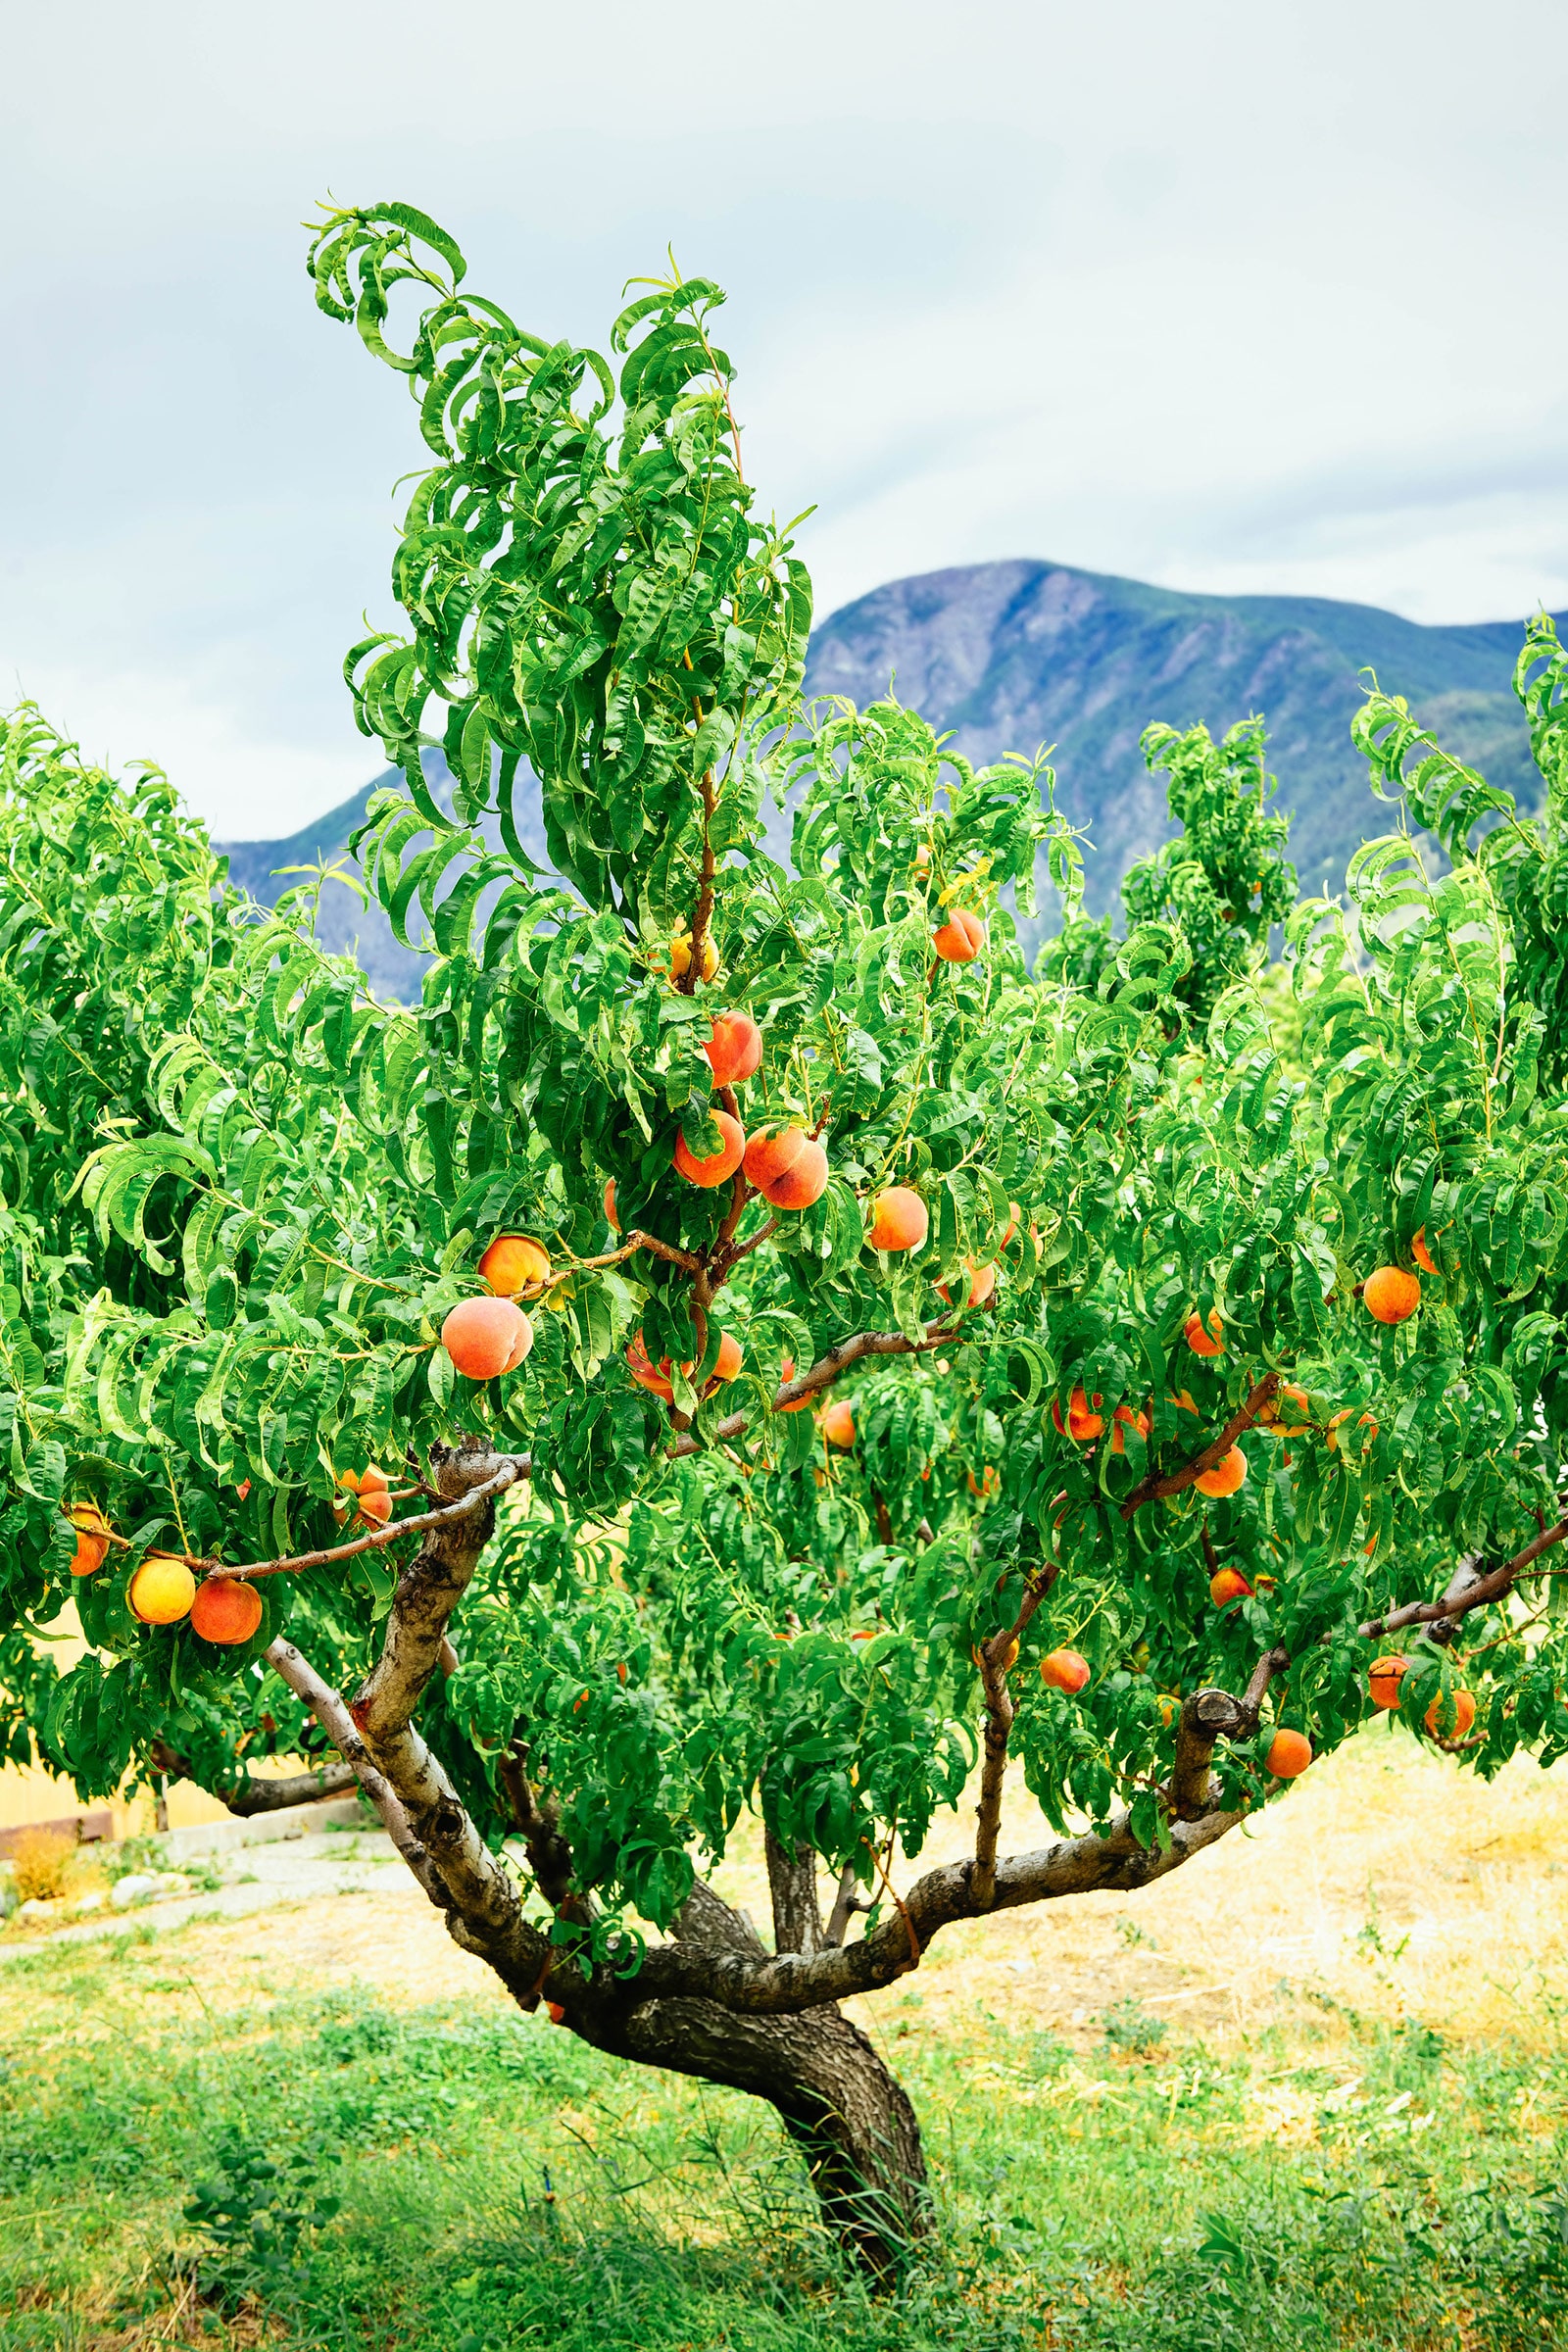 Fast-growing Elberta peach tree filled with ripe fruits